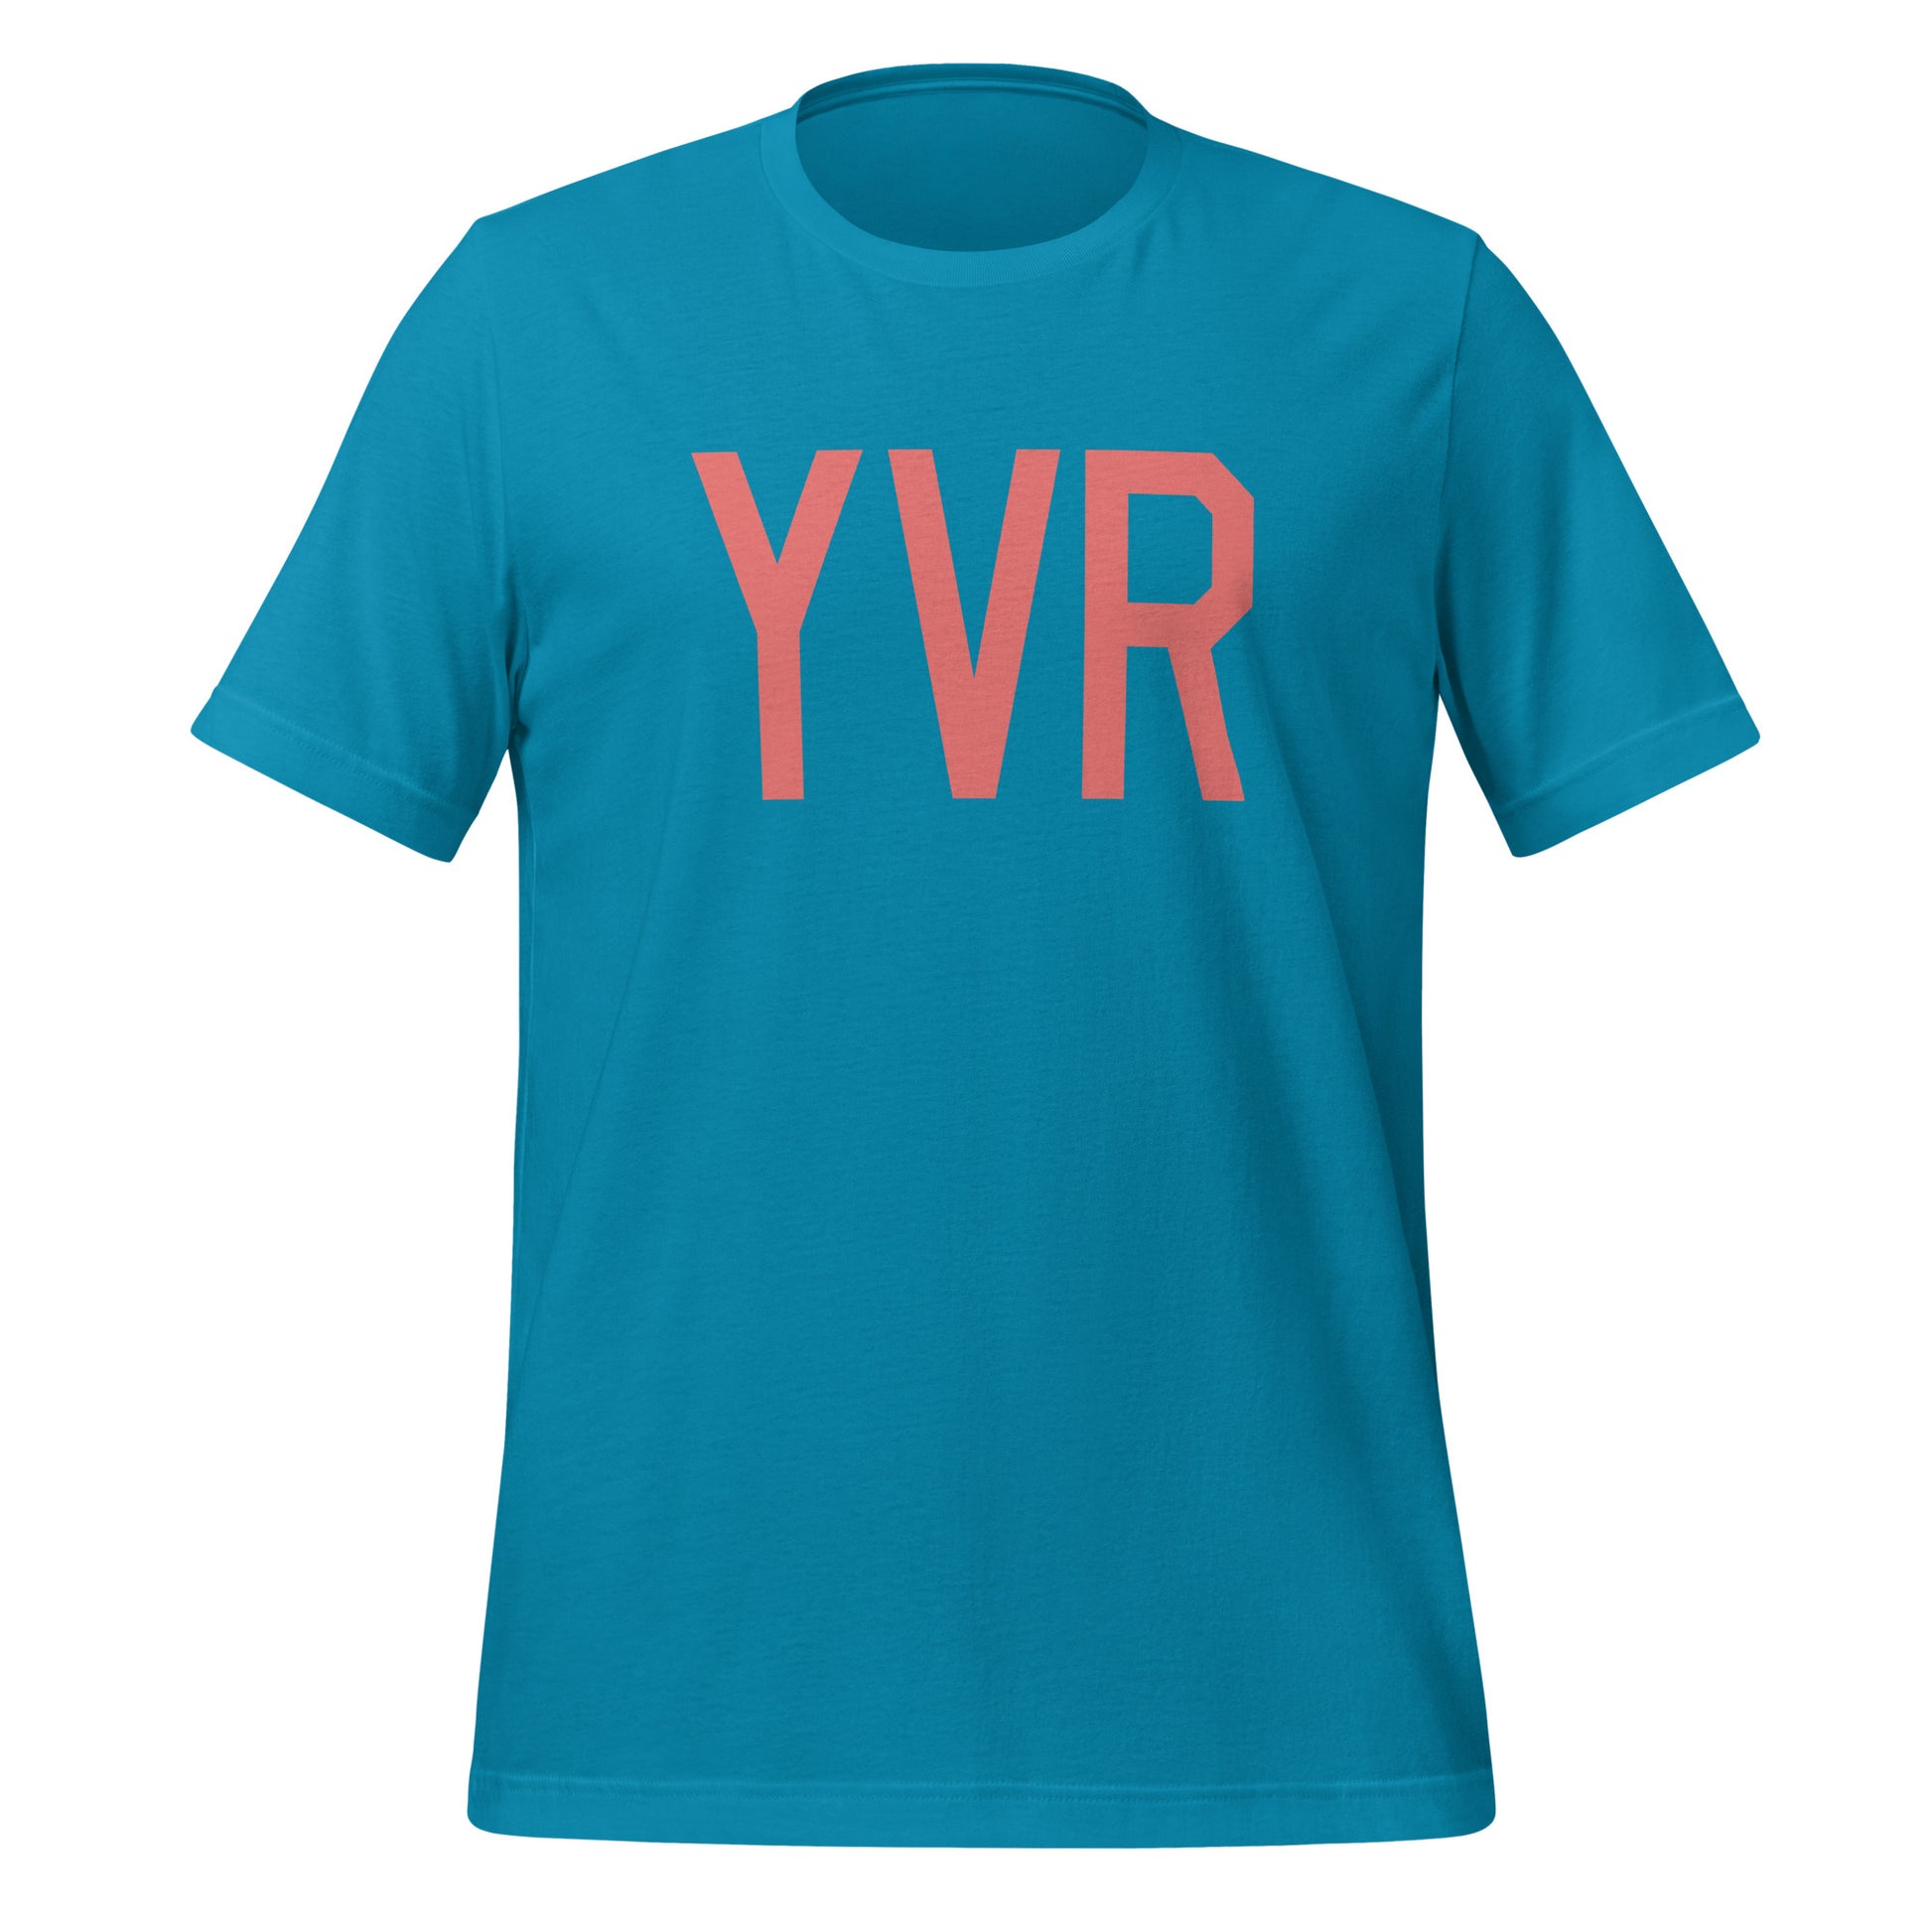 Aviation Enthusiast Unisex Tee - Pink Graphic • YVR Vancouver • YHM Designs - Image 06